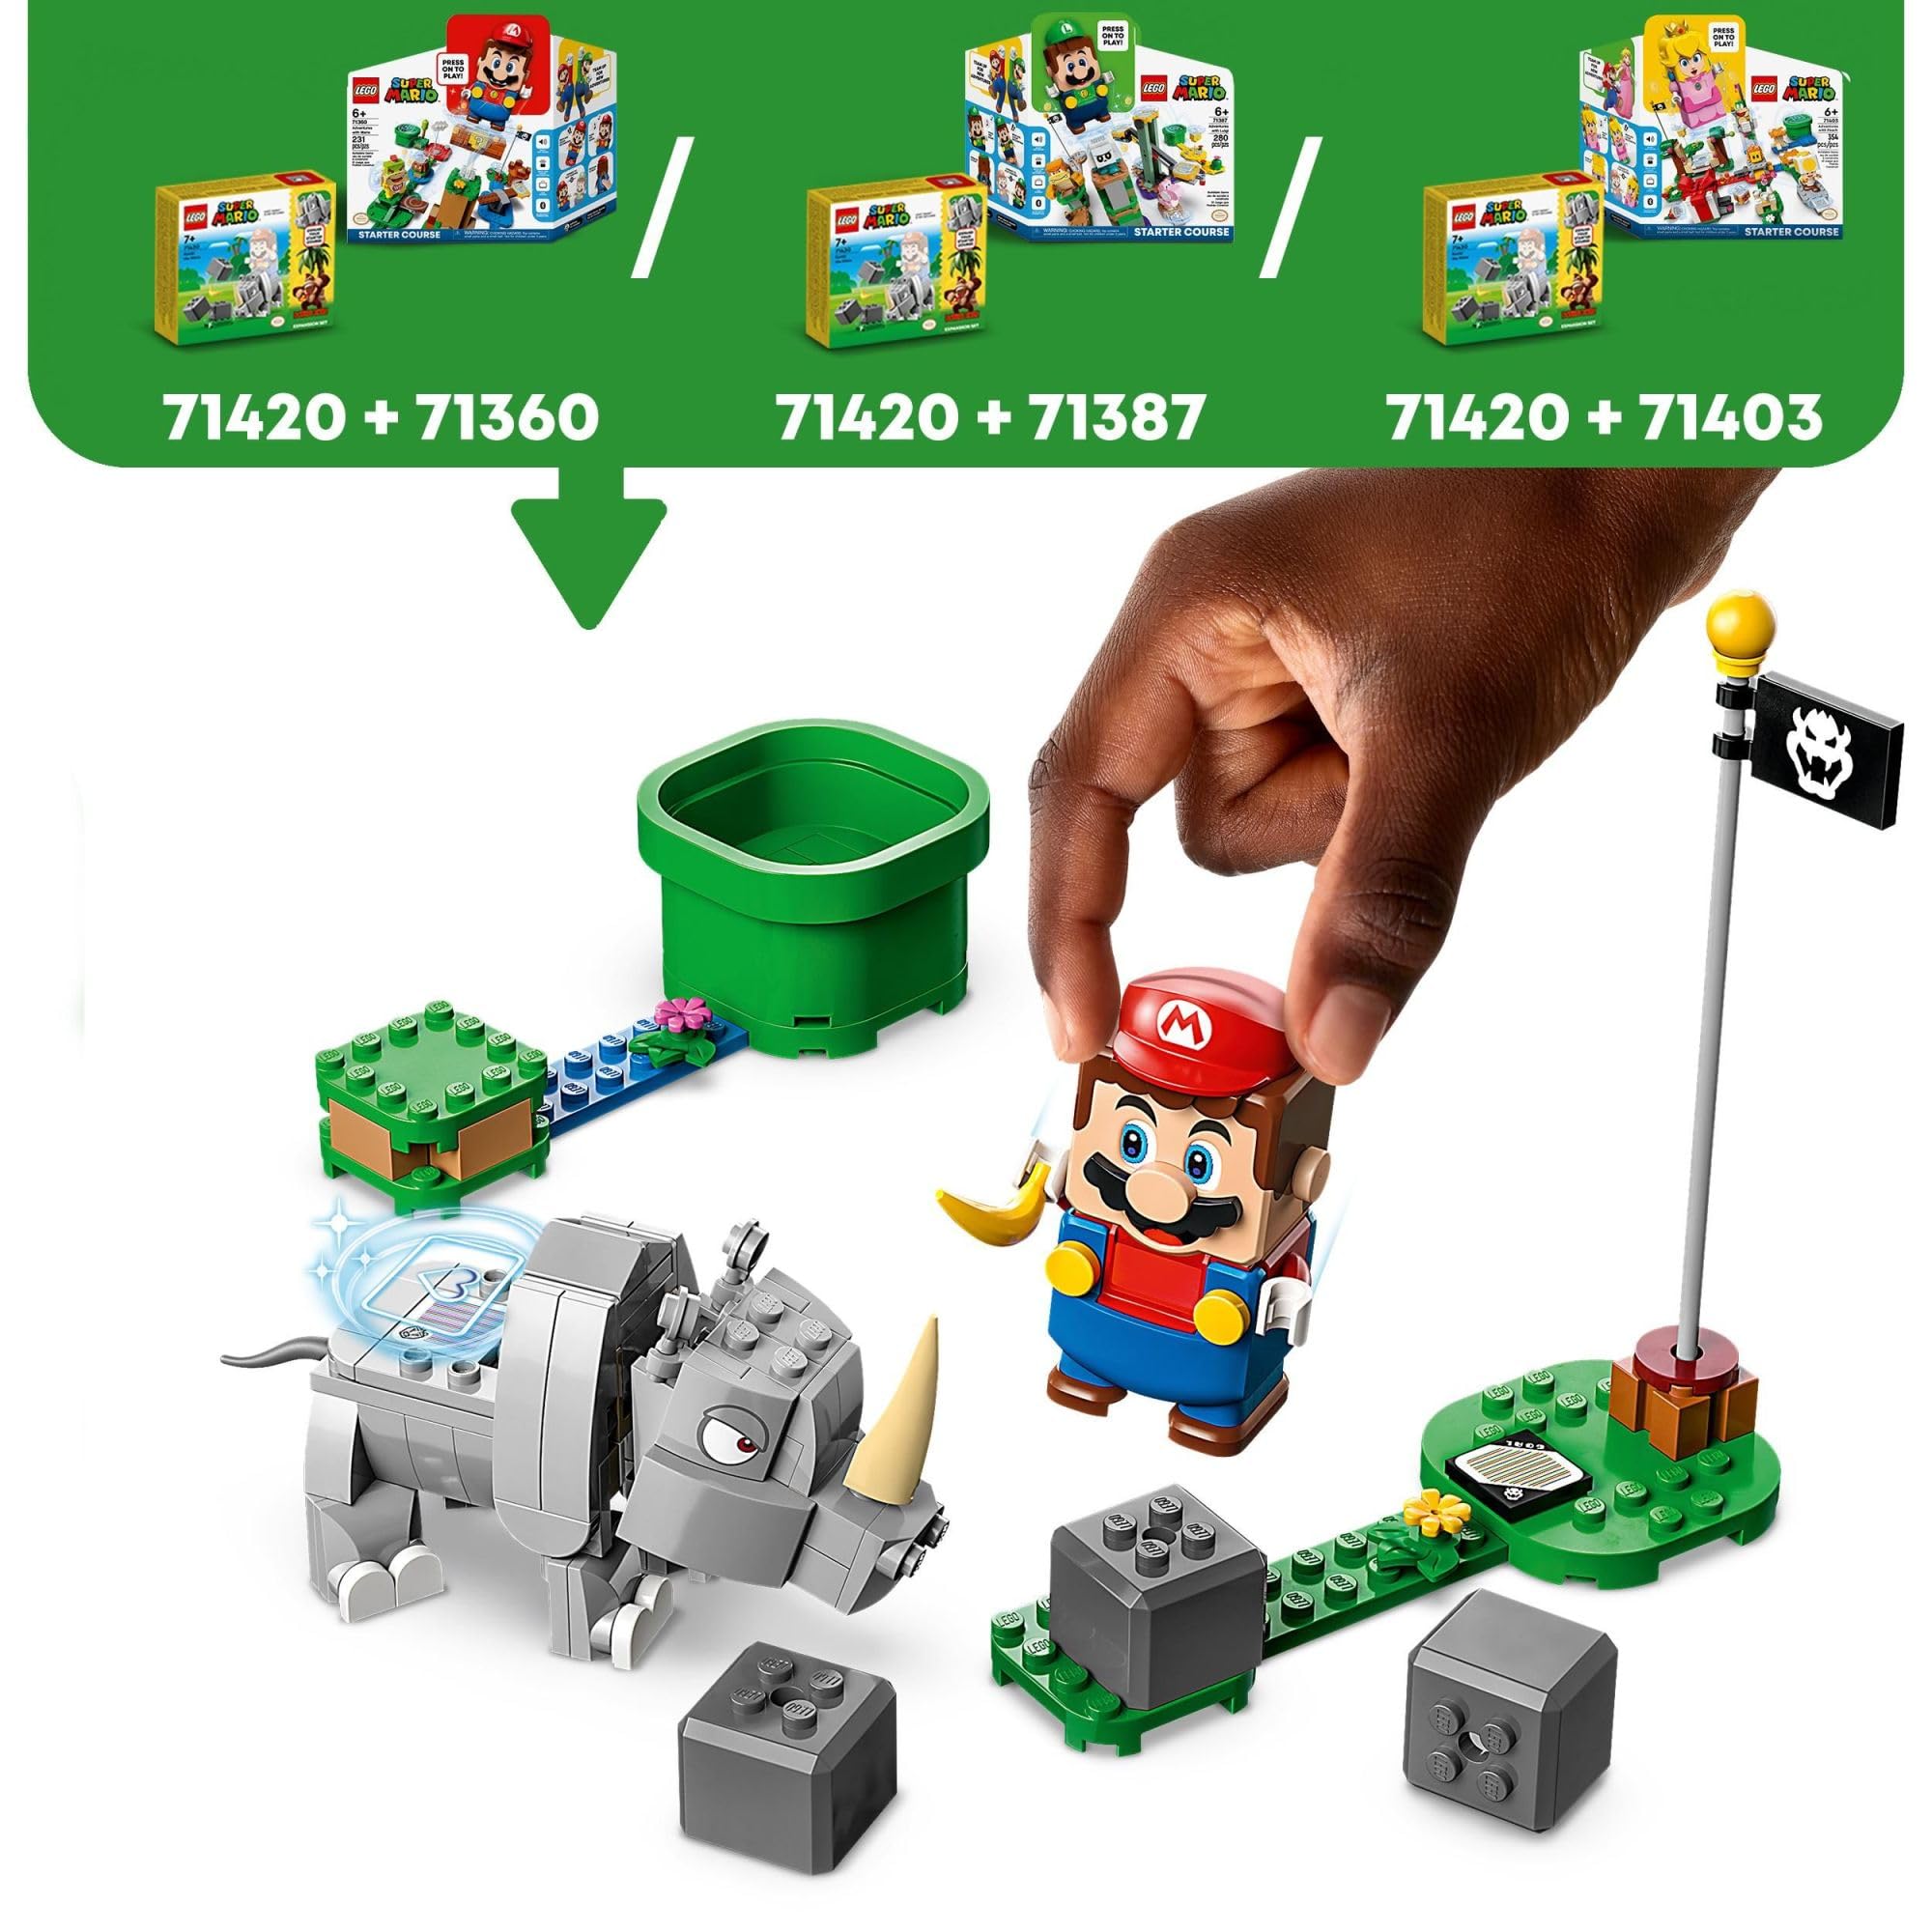 LEGO Super Mario Rambi The Rhino Expansion Set 71420, Game Inspired Building Toy Set to Combine with a Starter Course, This Collectible Super Mario Bros Toy Makes a Great Gift for Kids Ages 7 and Up